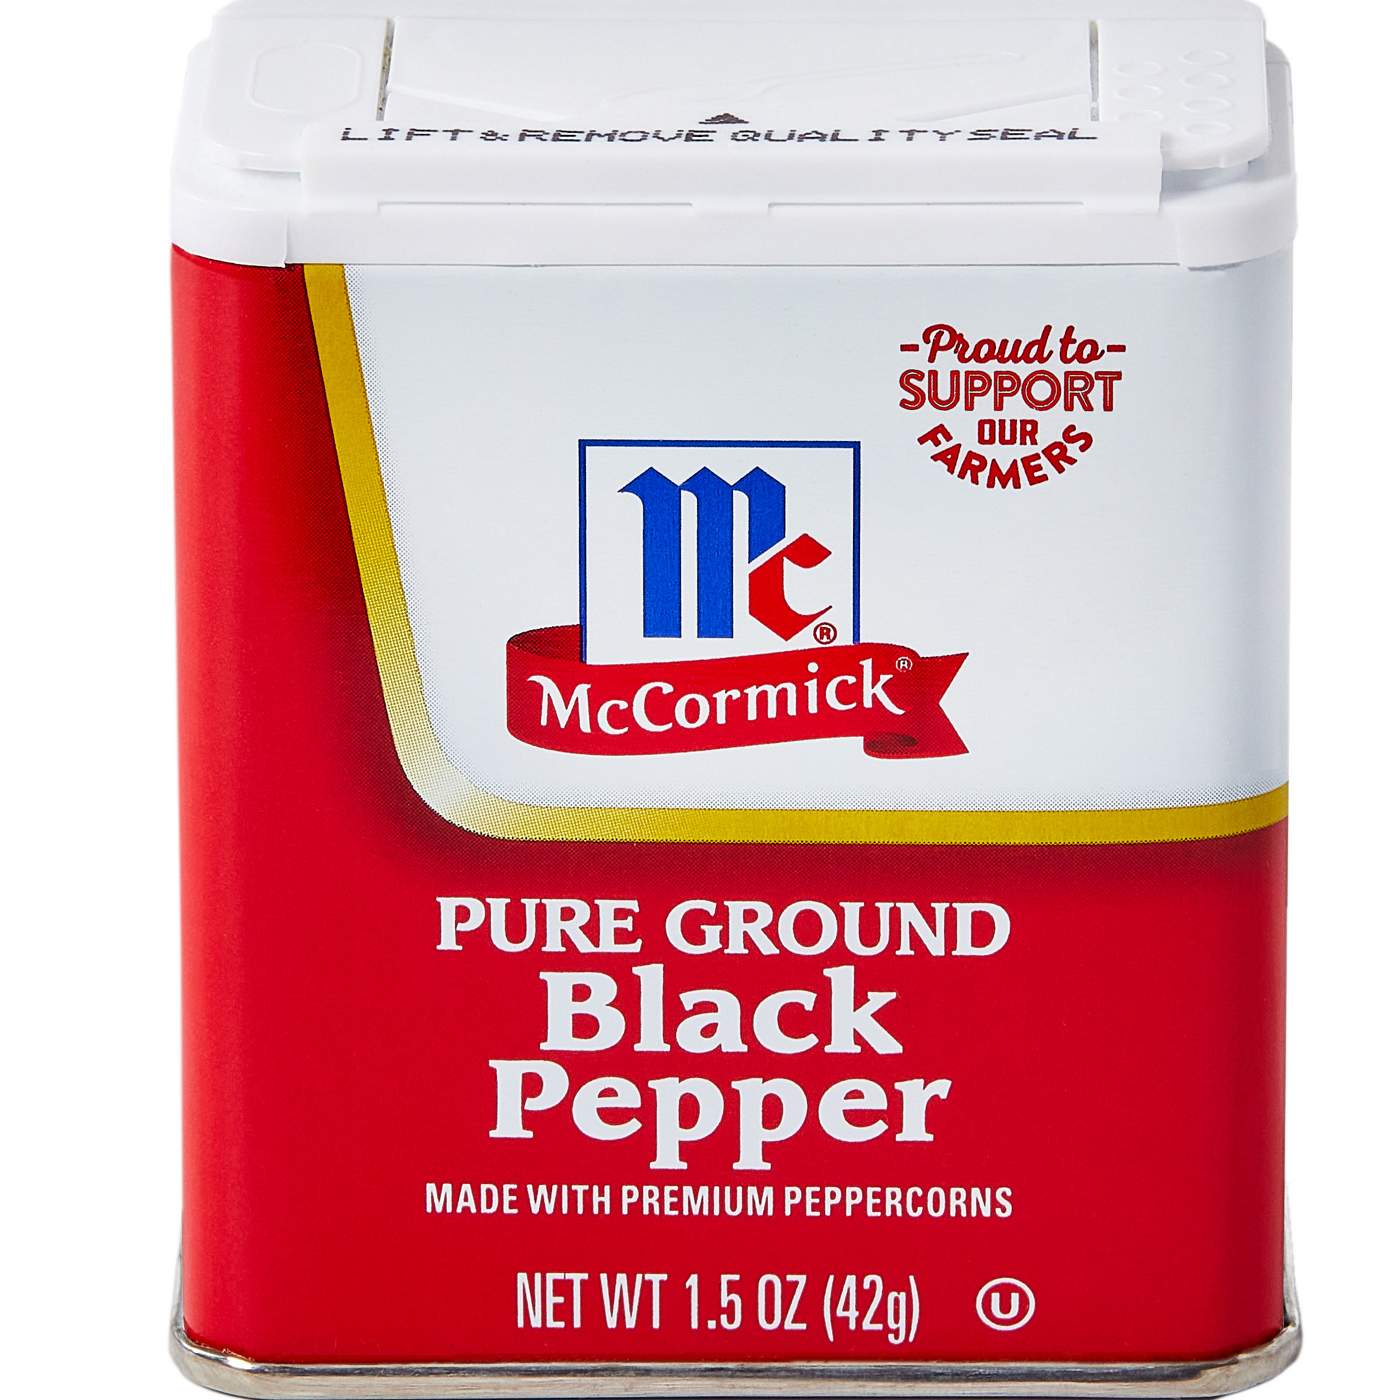 McCormick Pure Ground Black Pepper; image 1 of 7